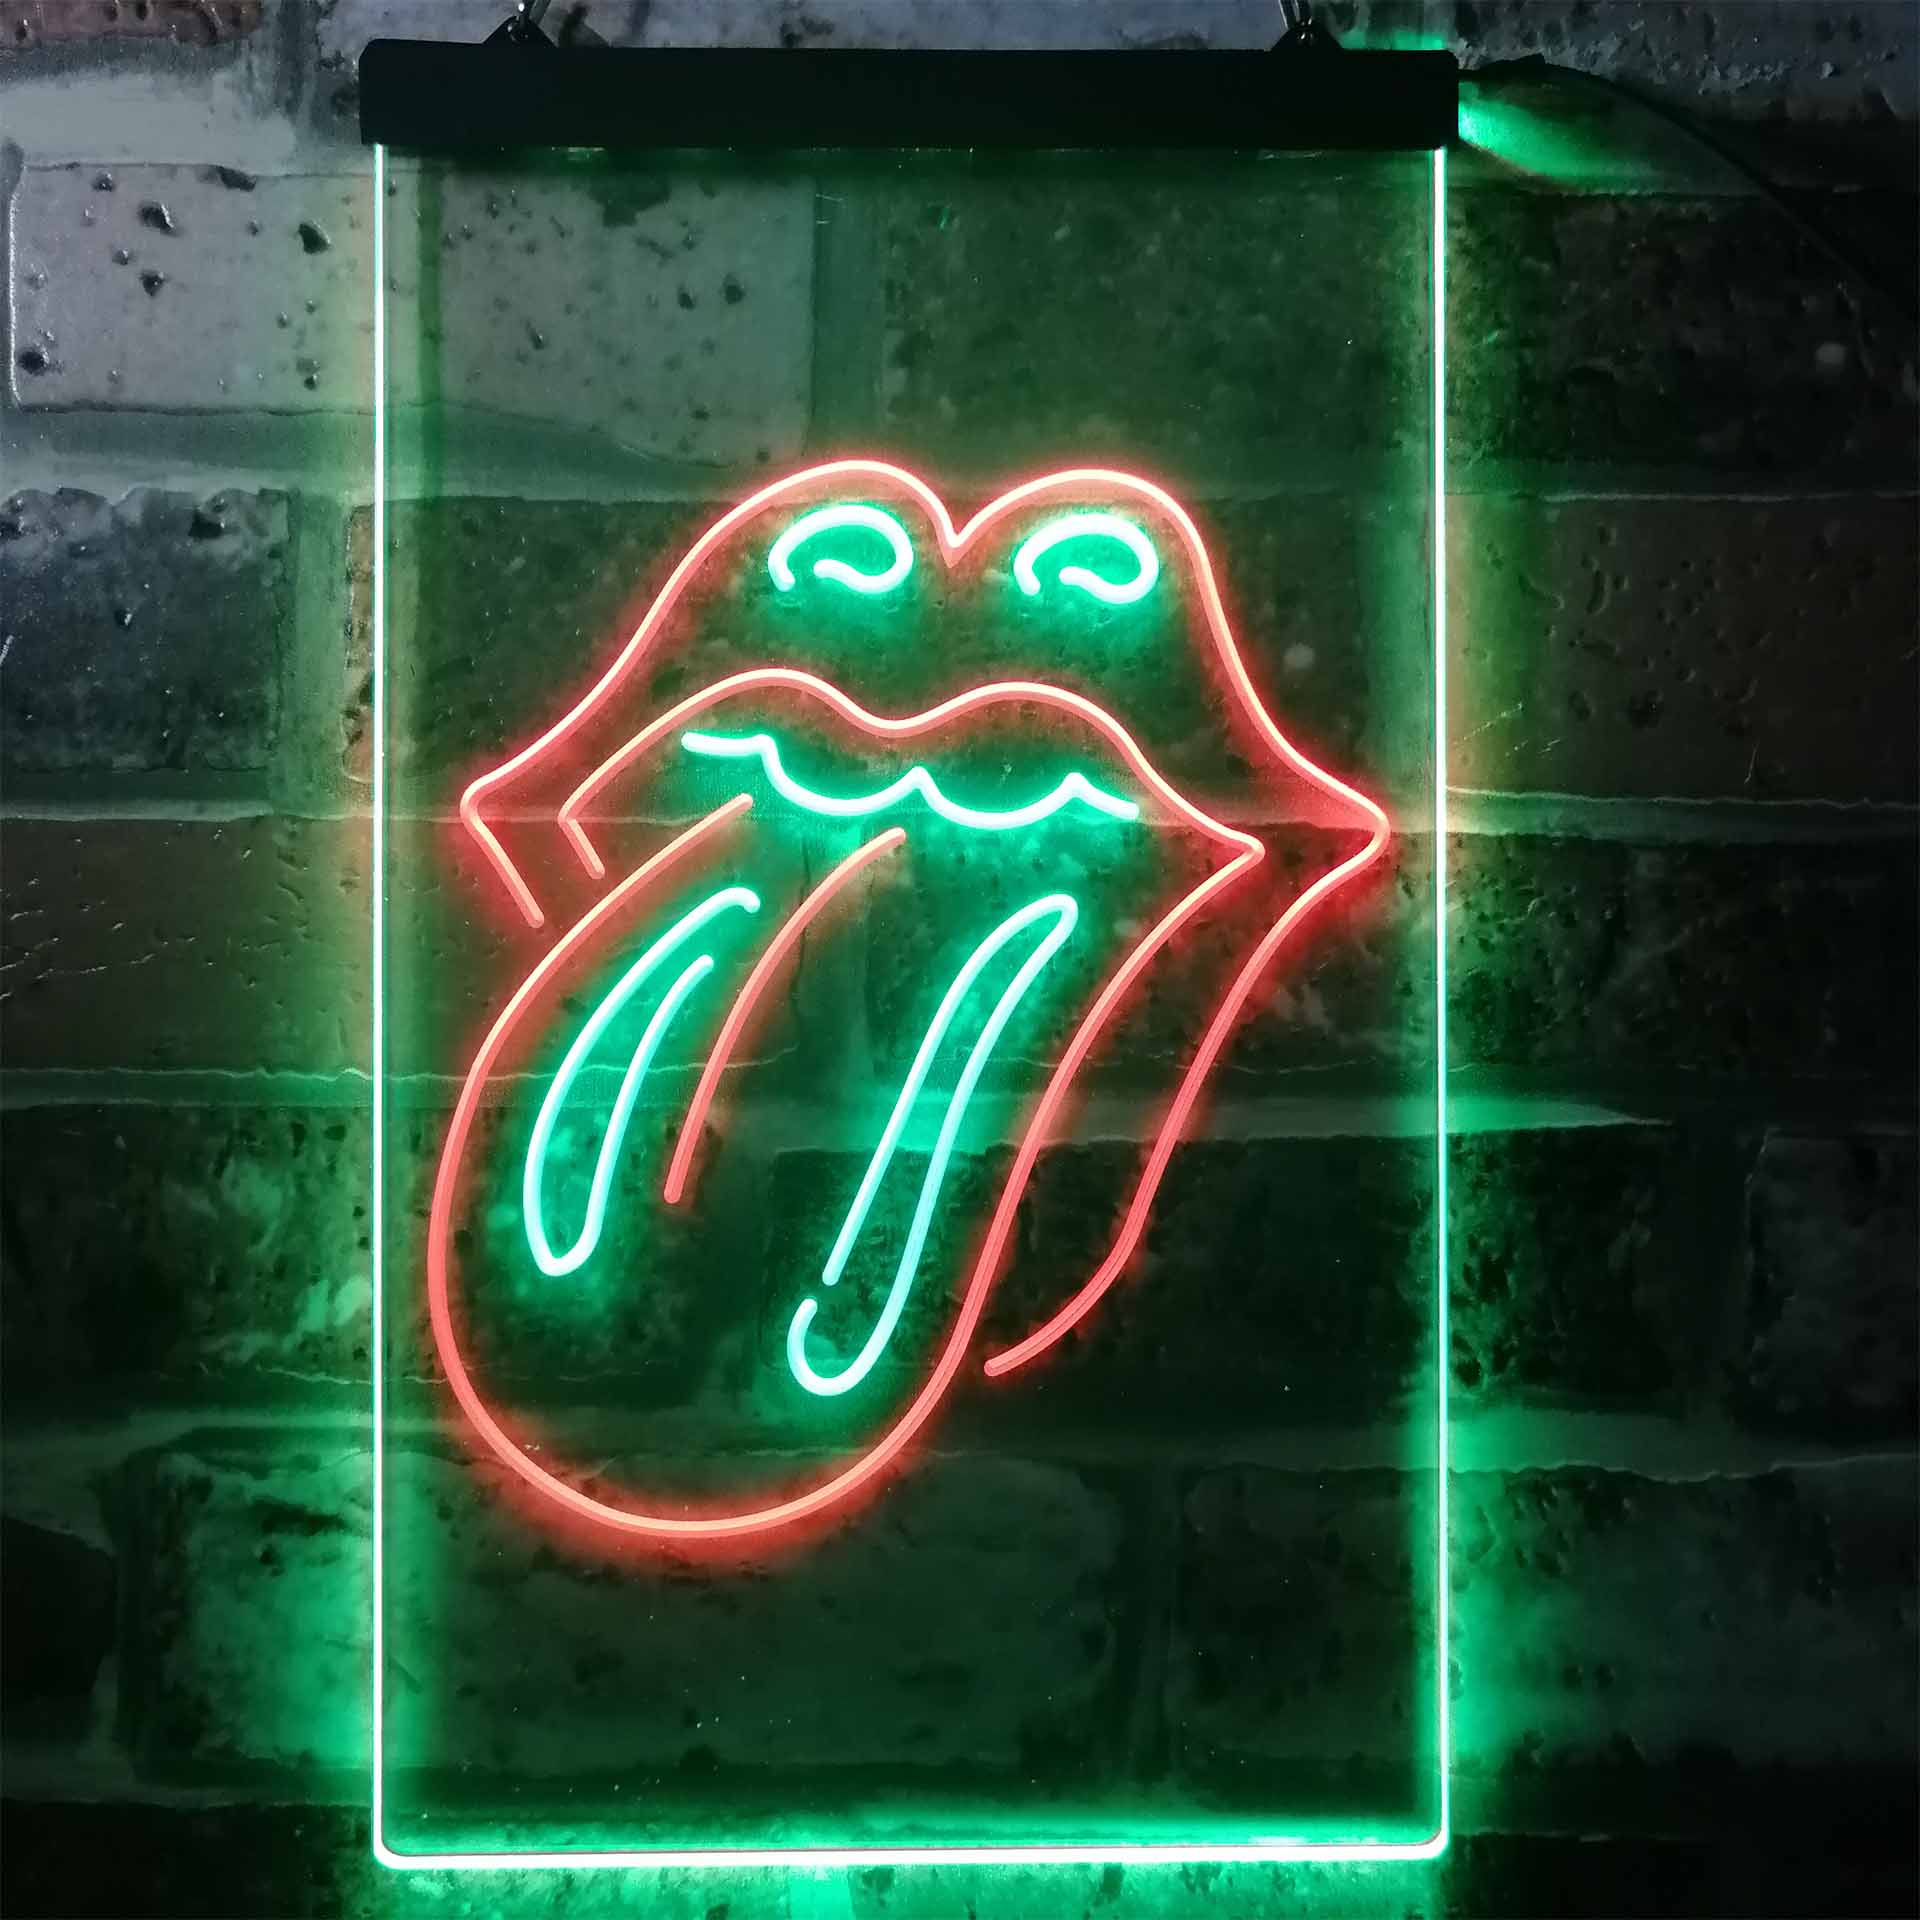 Rolling Stones Band LED Neon Sign